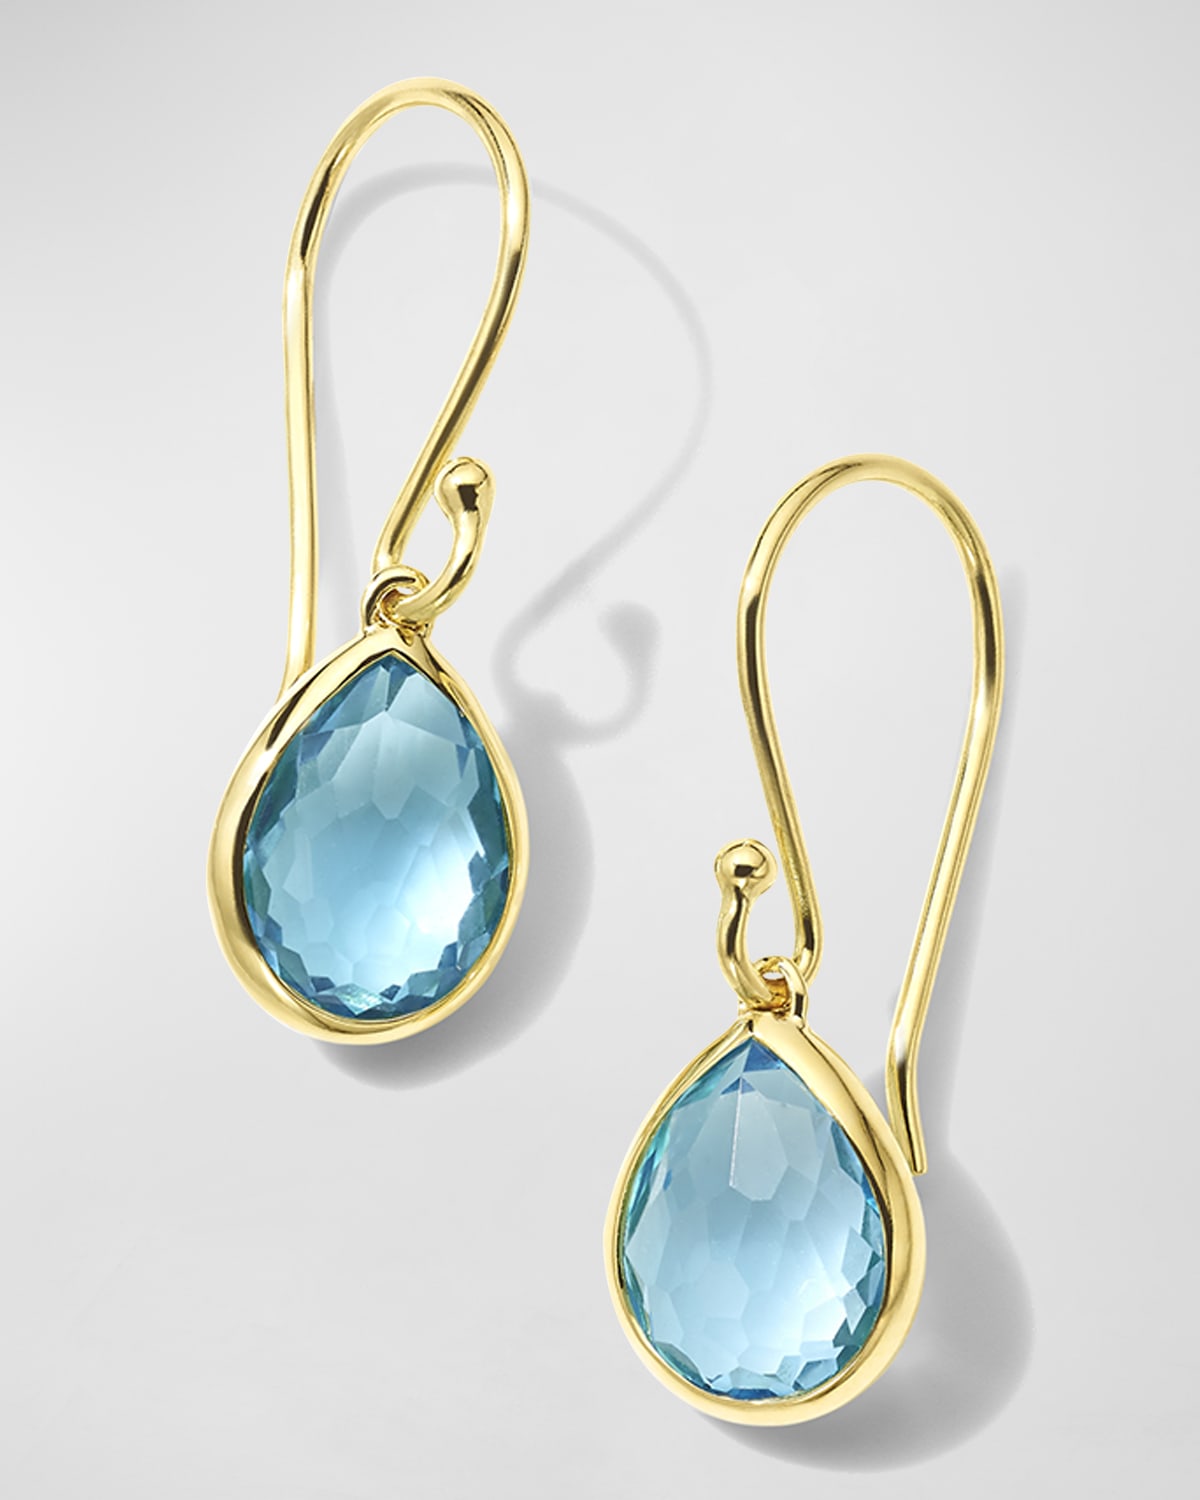 9ct Gold Turquoise Teardrop Short Drop Earrings Gift Boxed Made in UK 